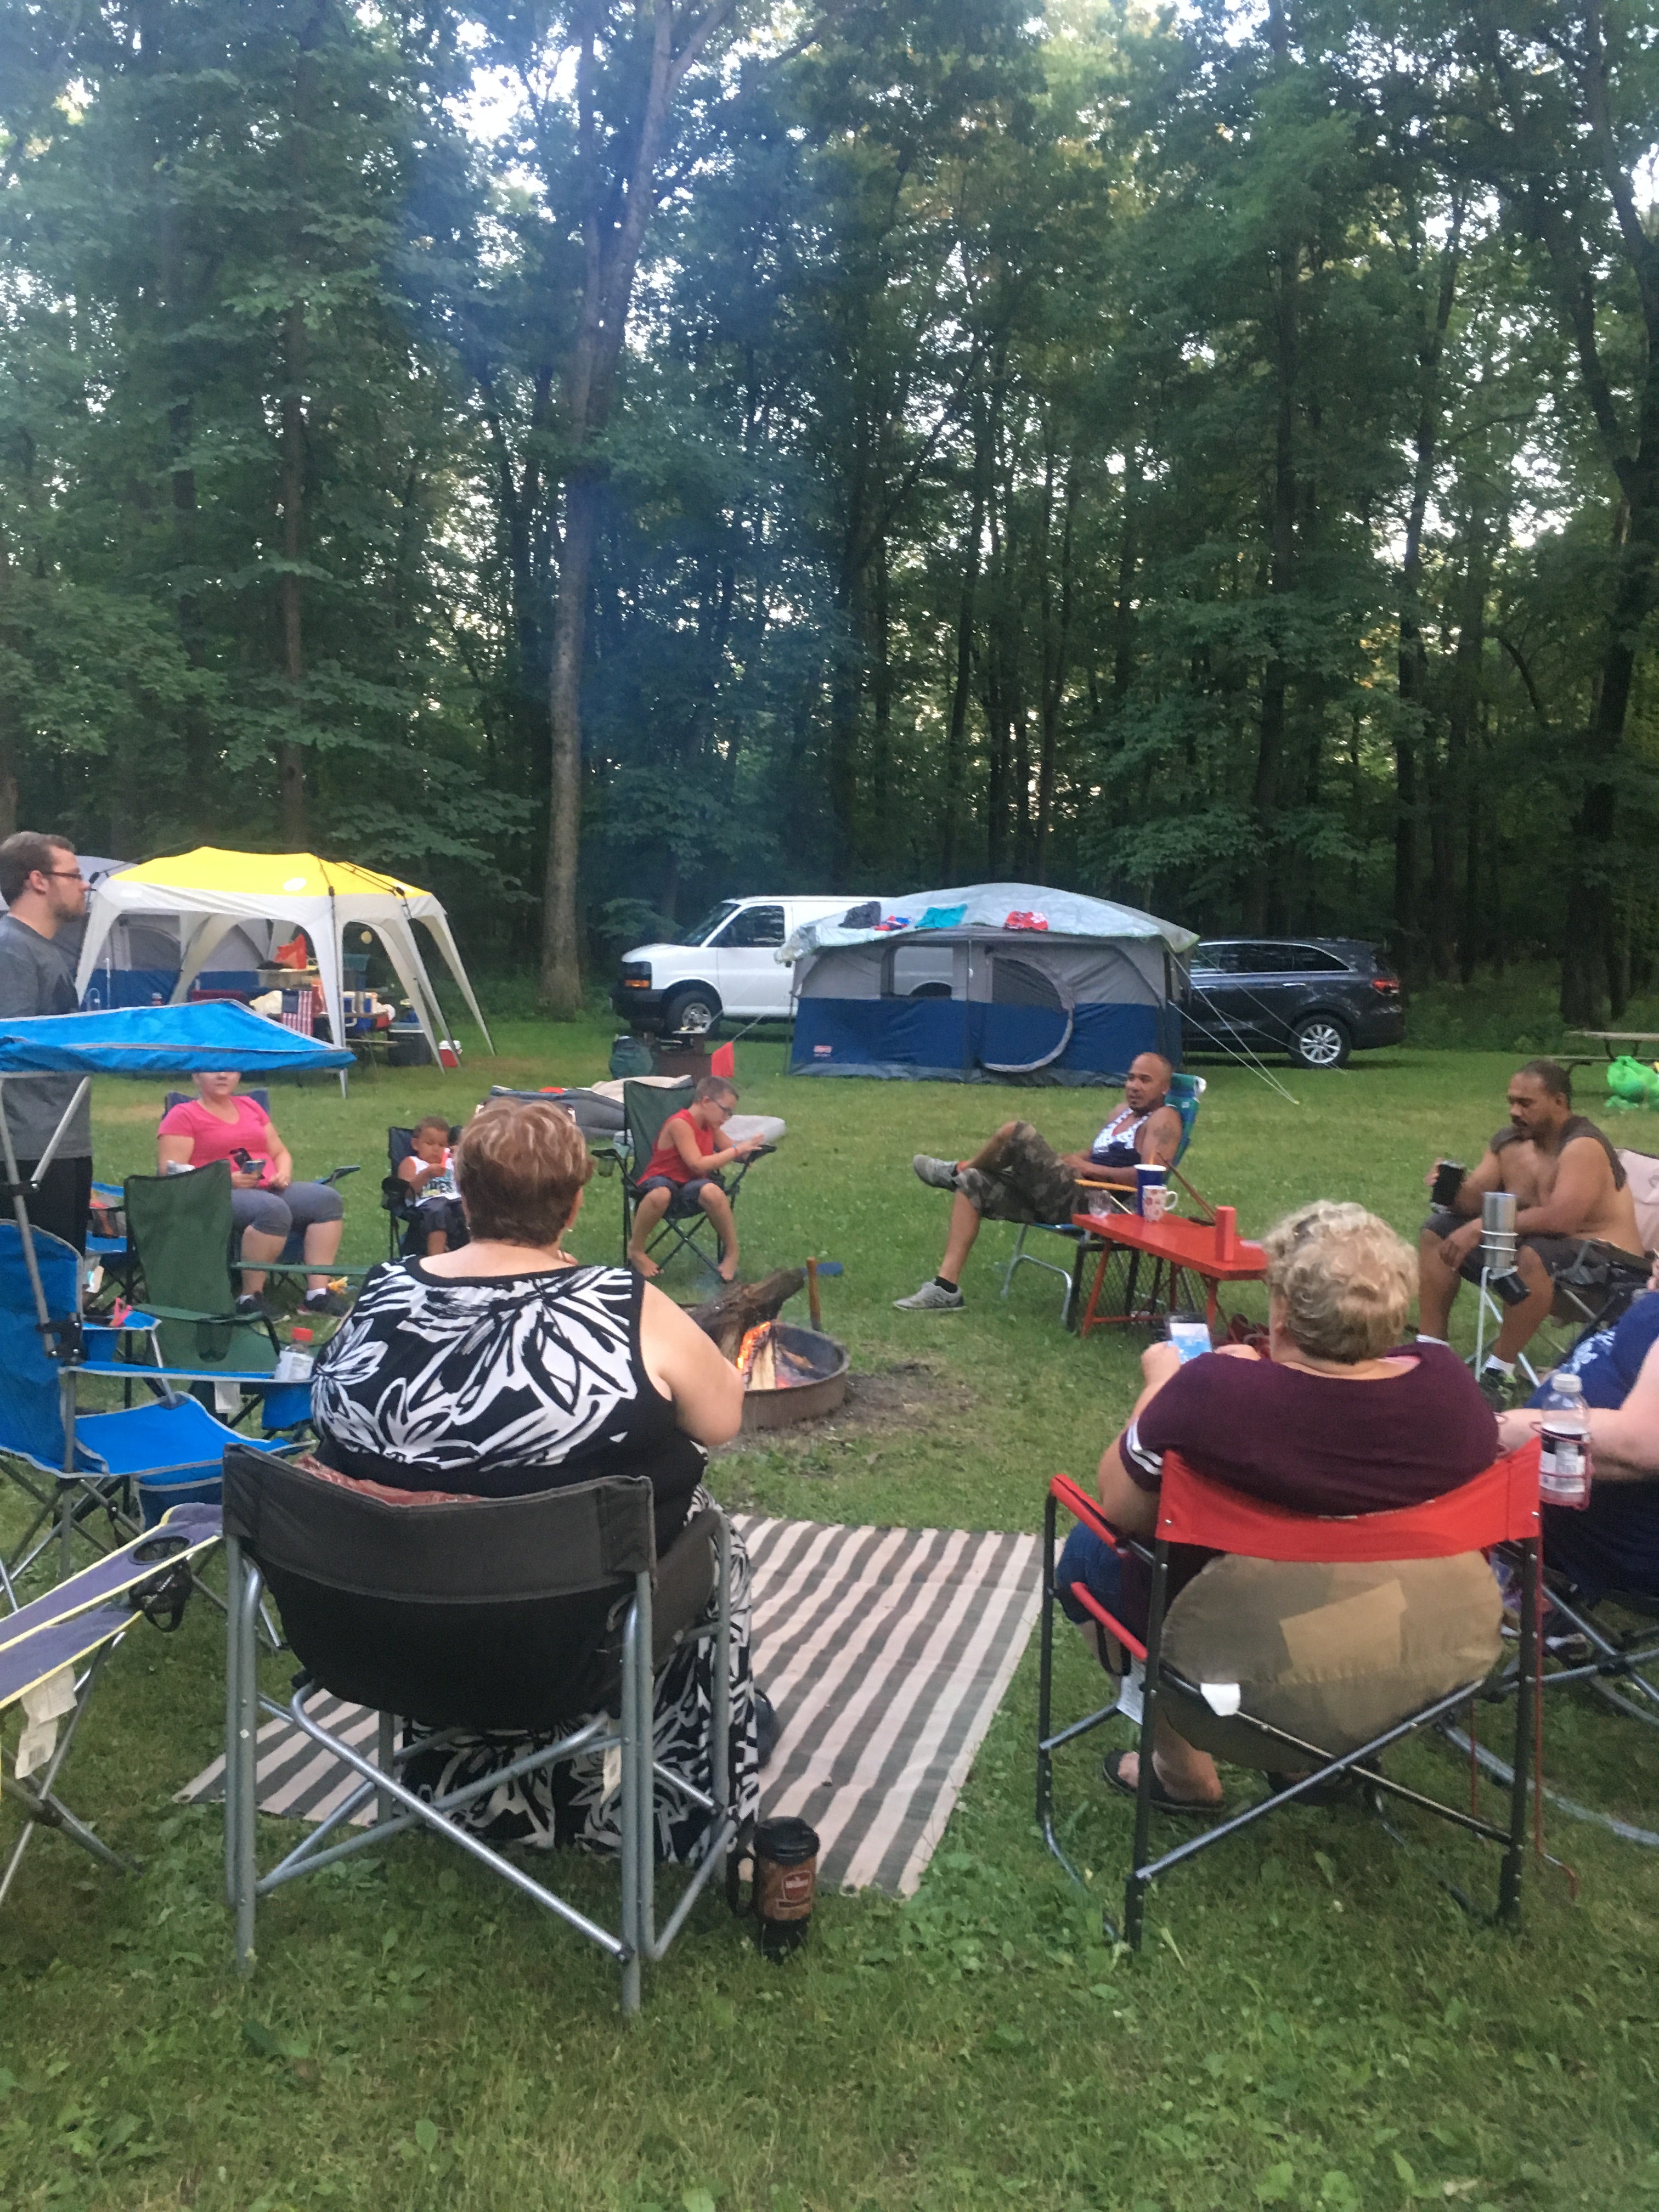 Camper submitted image from Fon du Lac County Waupun Park - 3